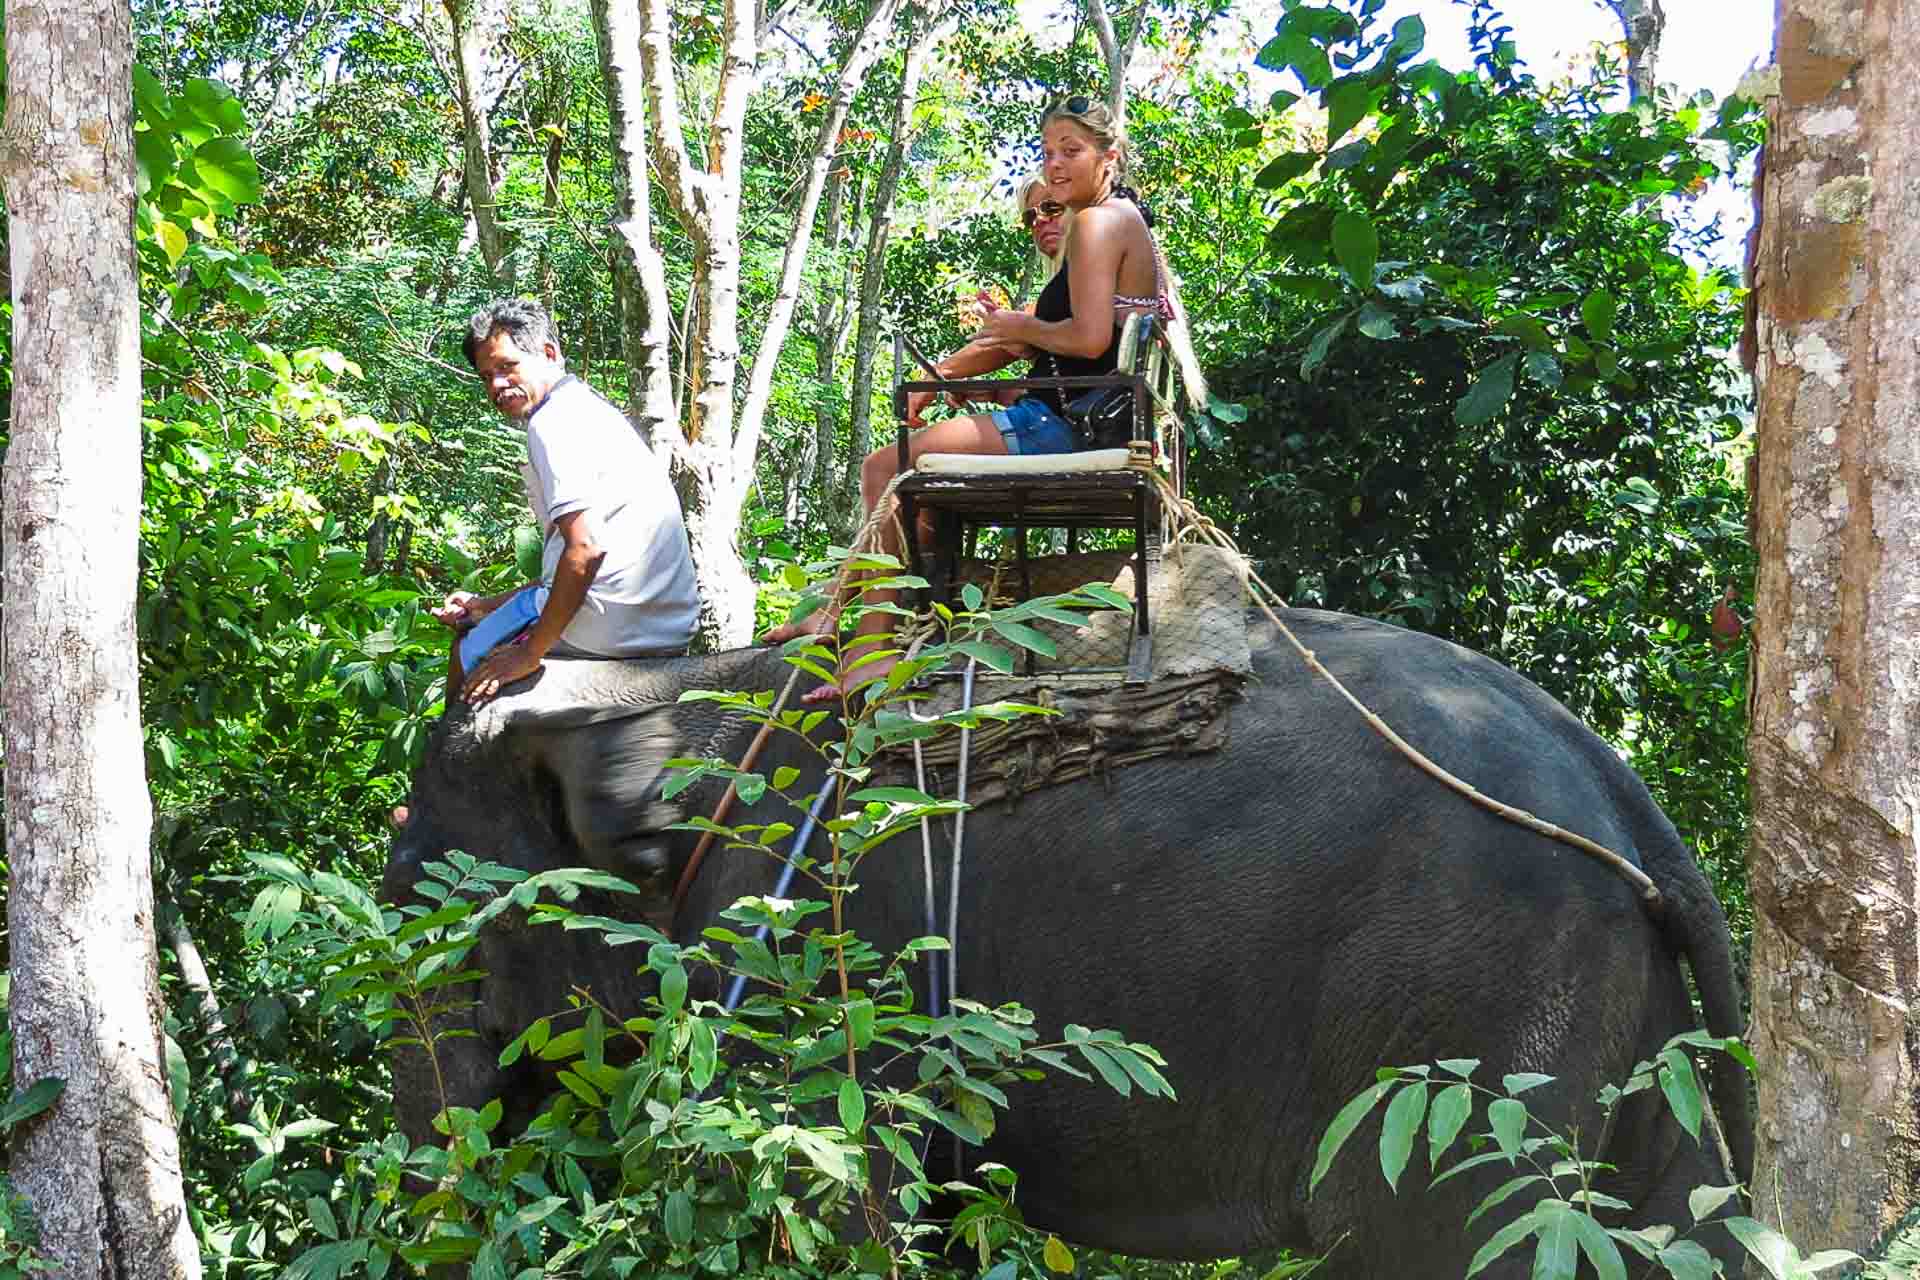 Two girls riding on an elephant sitting on a chair on his back and a man sitting on the elephant's neck